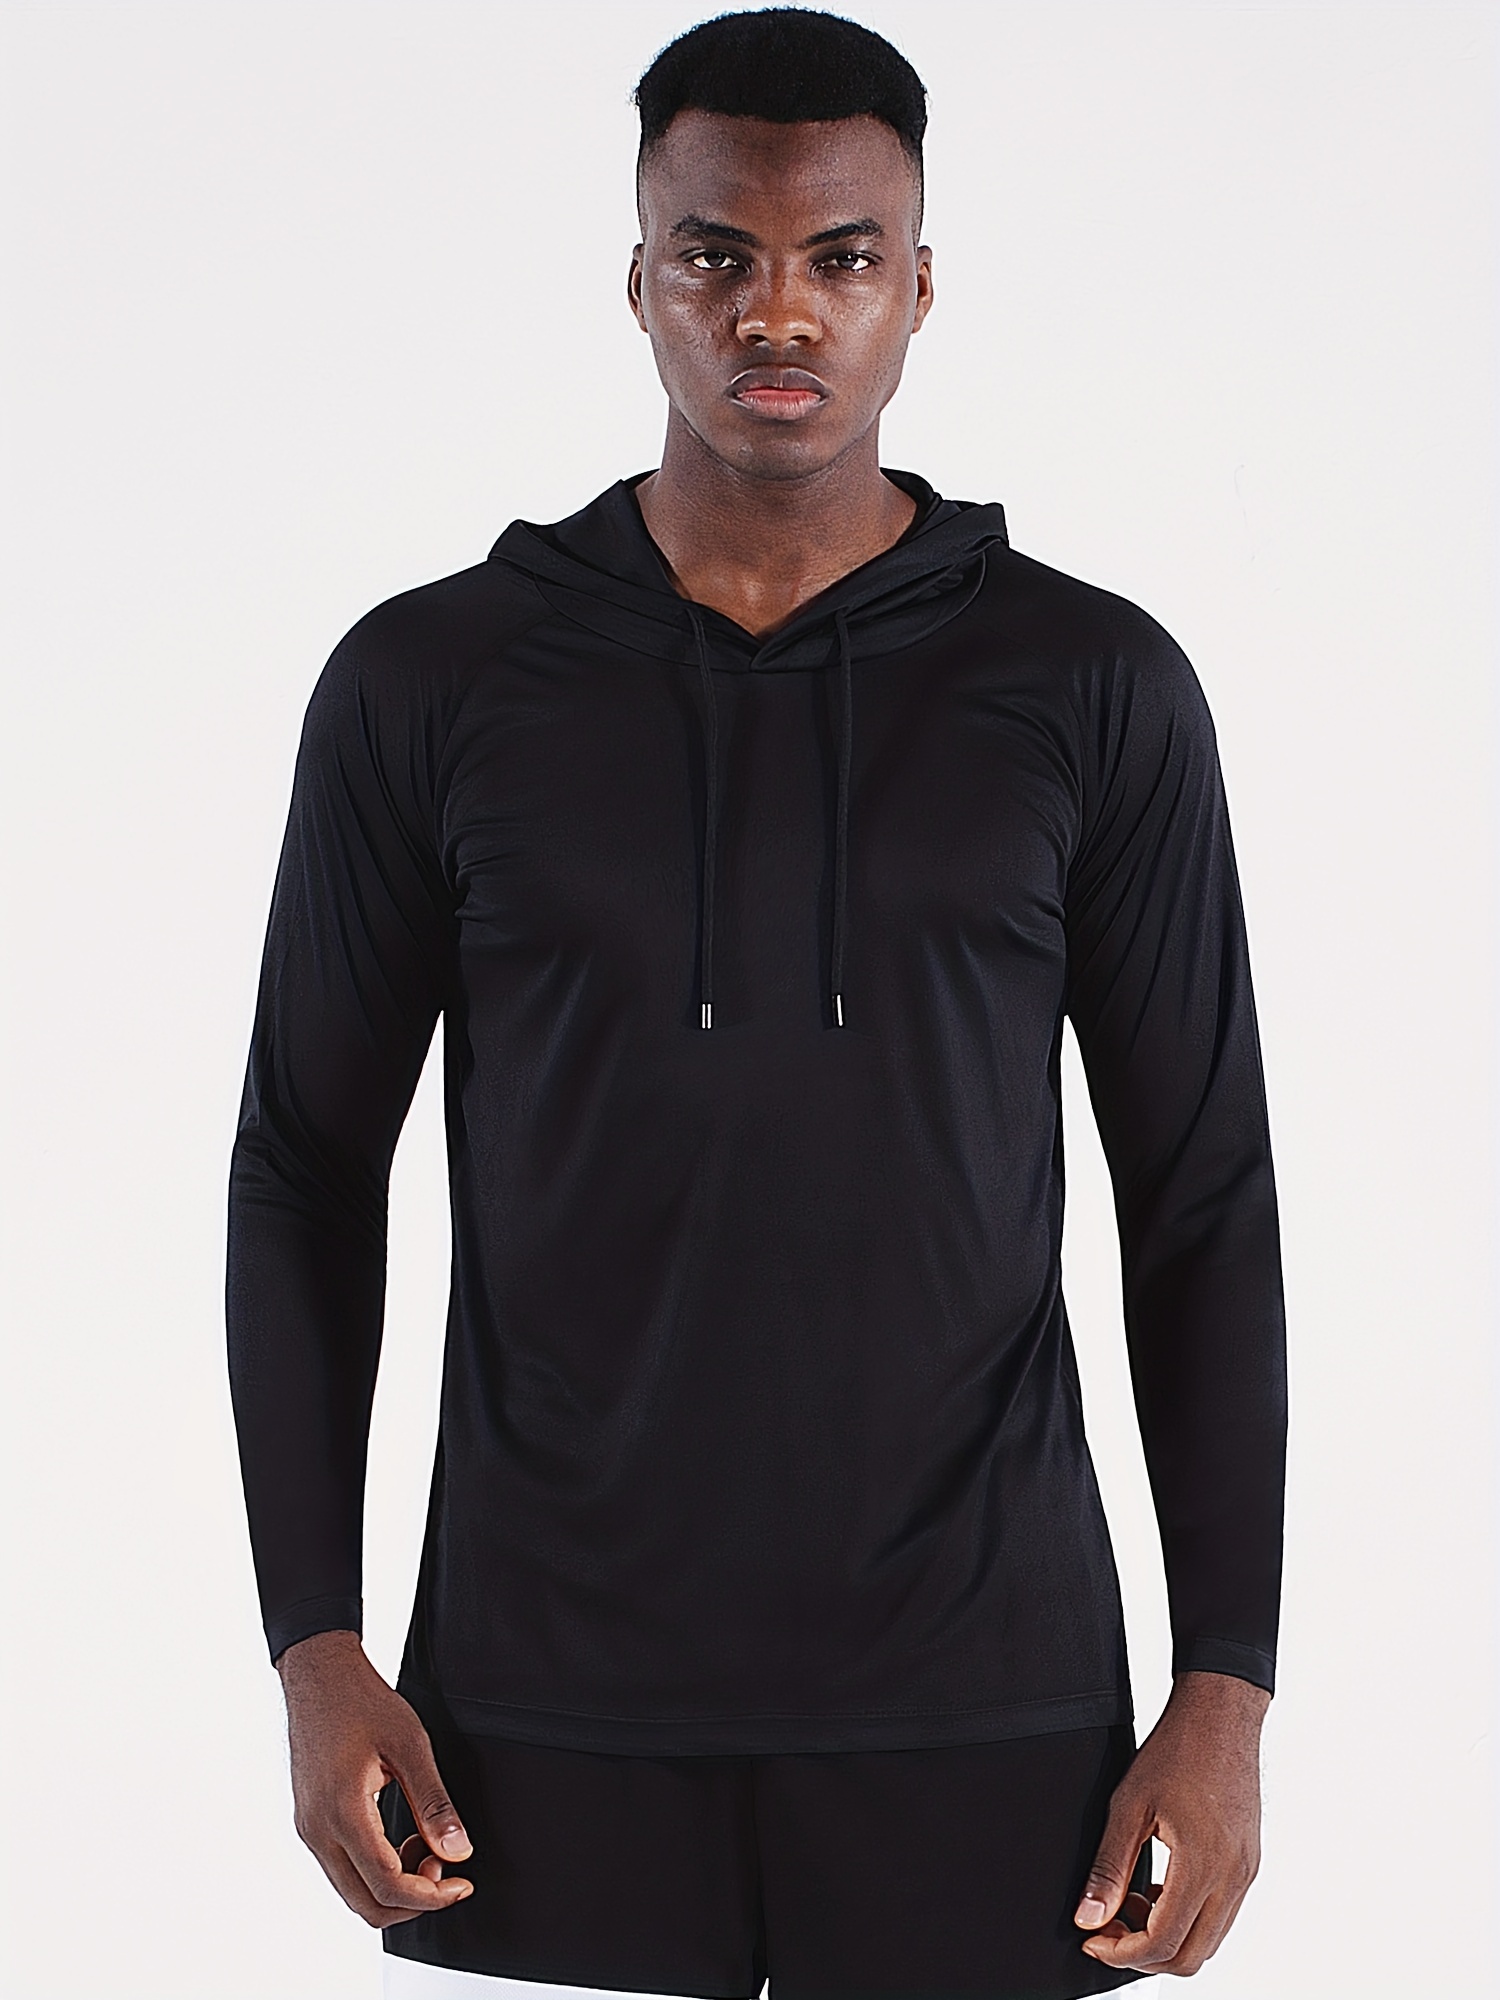 Long-Sleeve Compression Hoodie // Black (S) - Lights Out - Touch of Modern